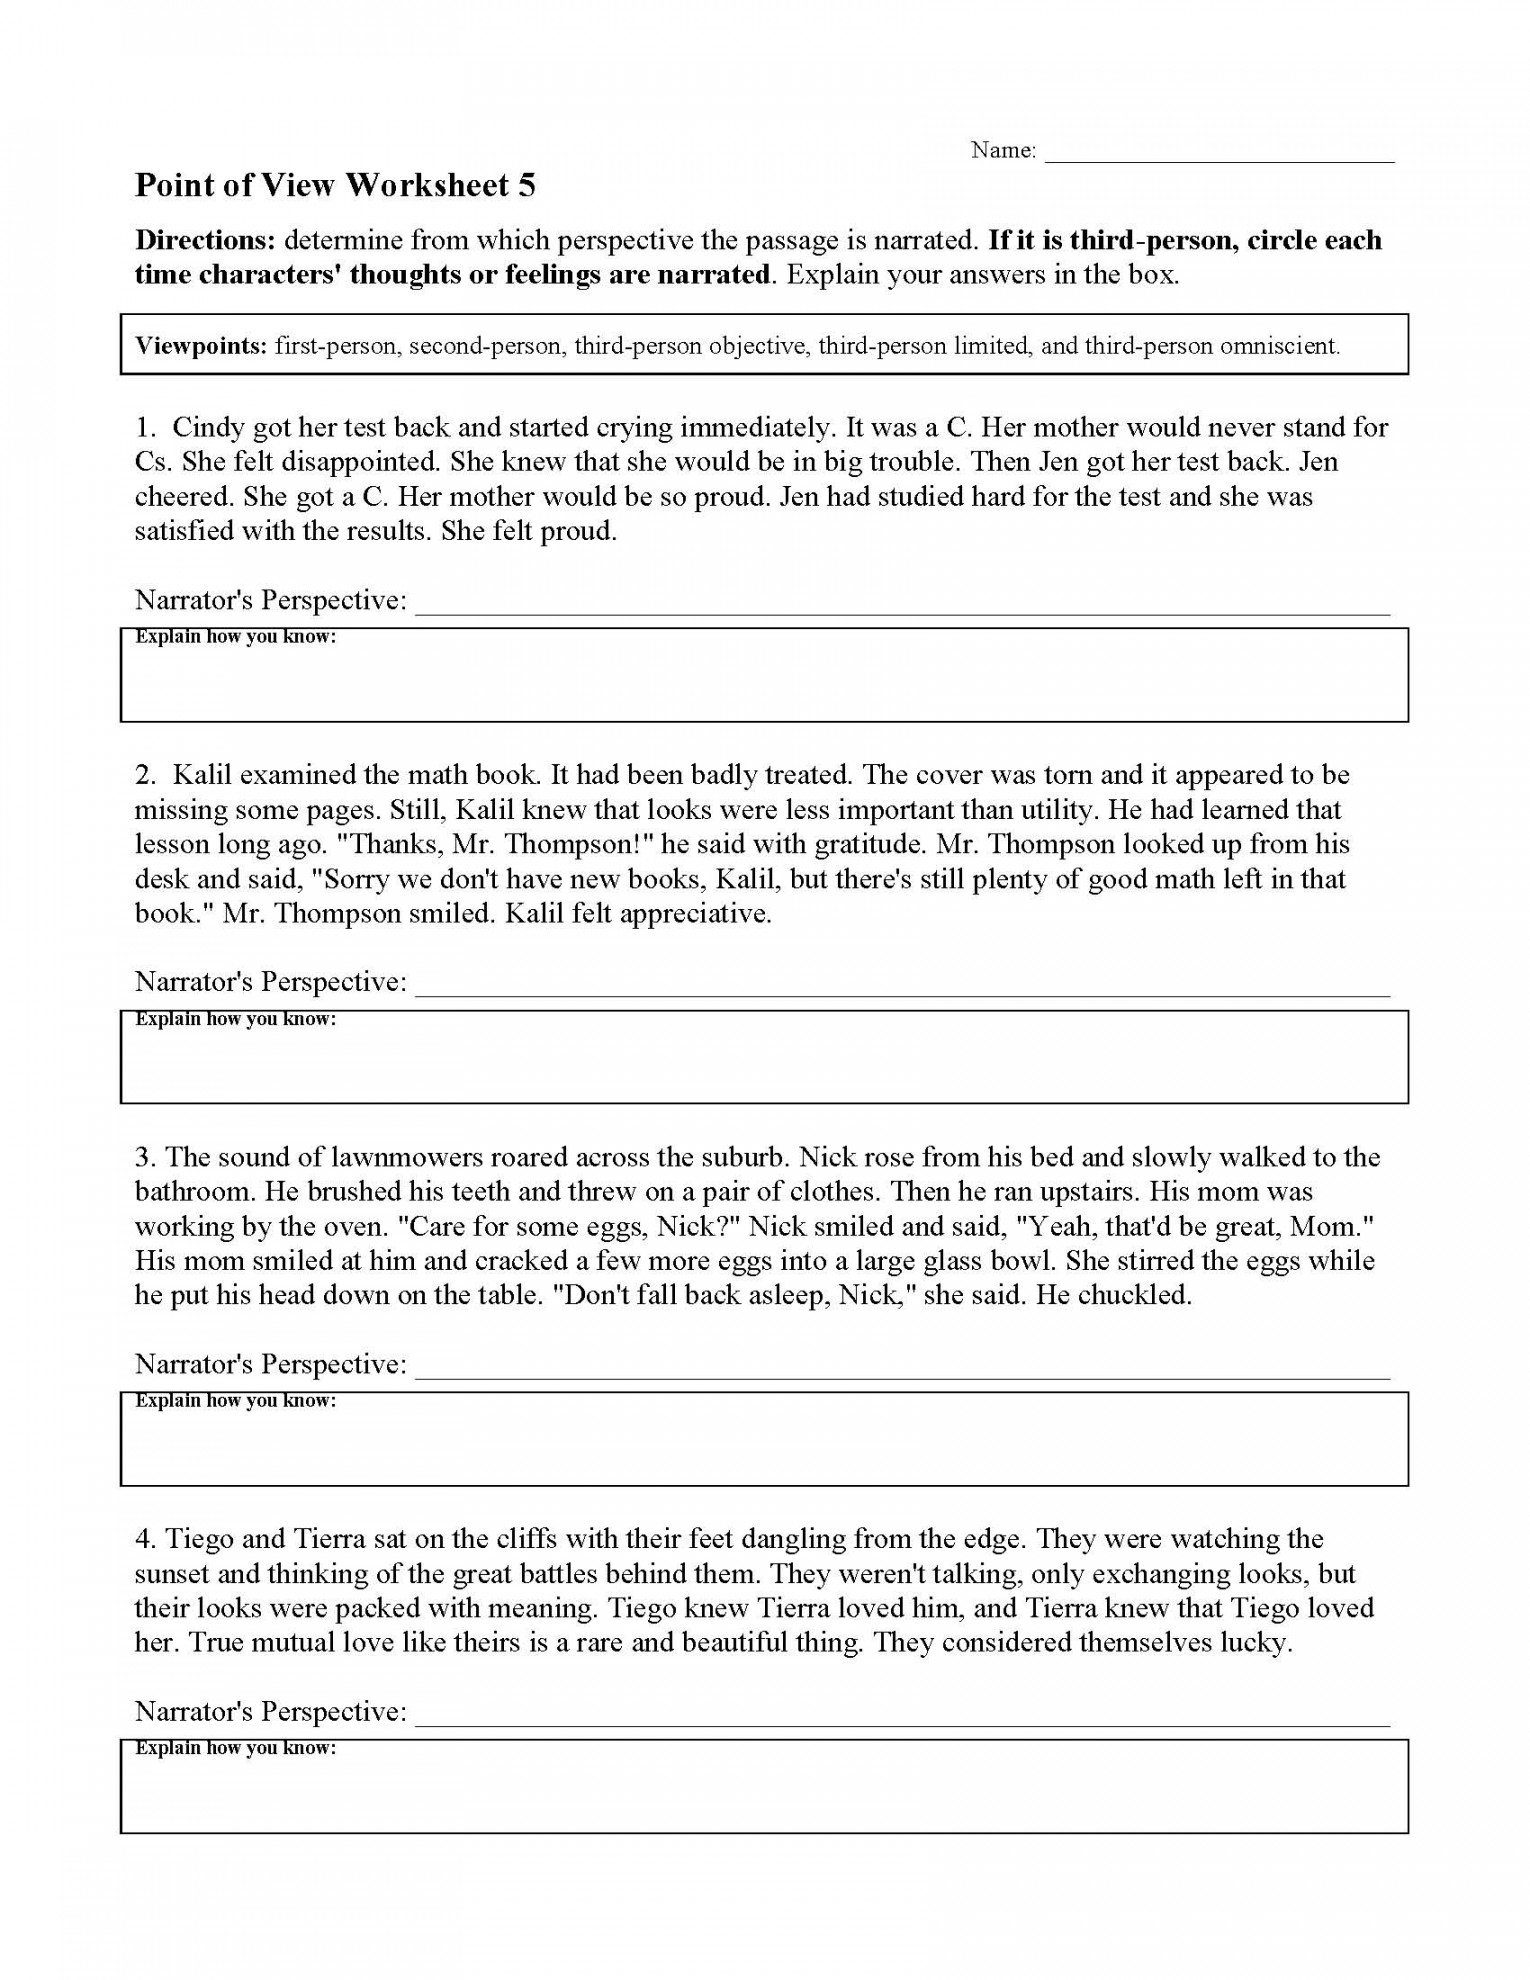 Point of View Worksheets  Reading Activities